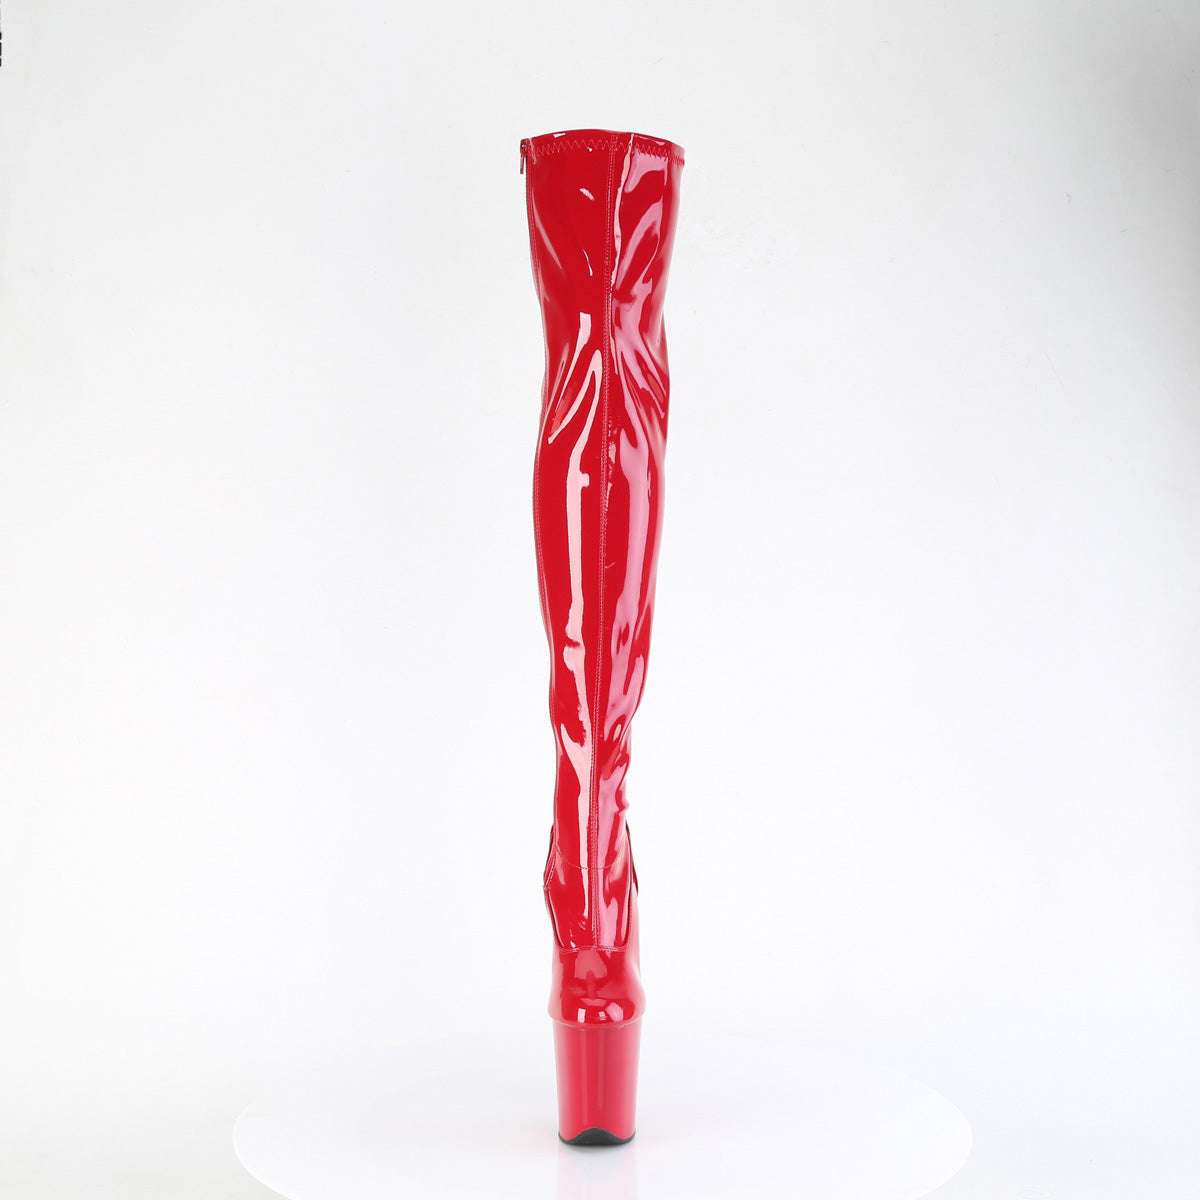 FLAMINGO-3000 / R / M 8 "PLEASER FAST DELIVERY 24-48h 